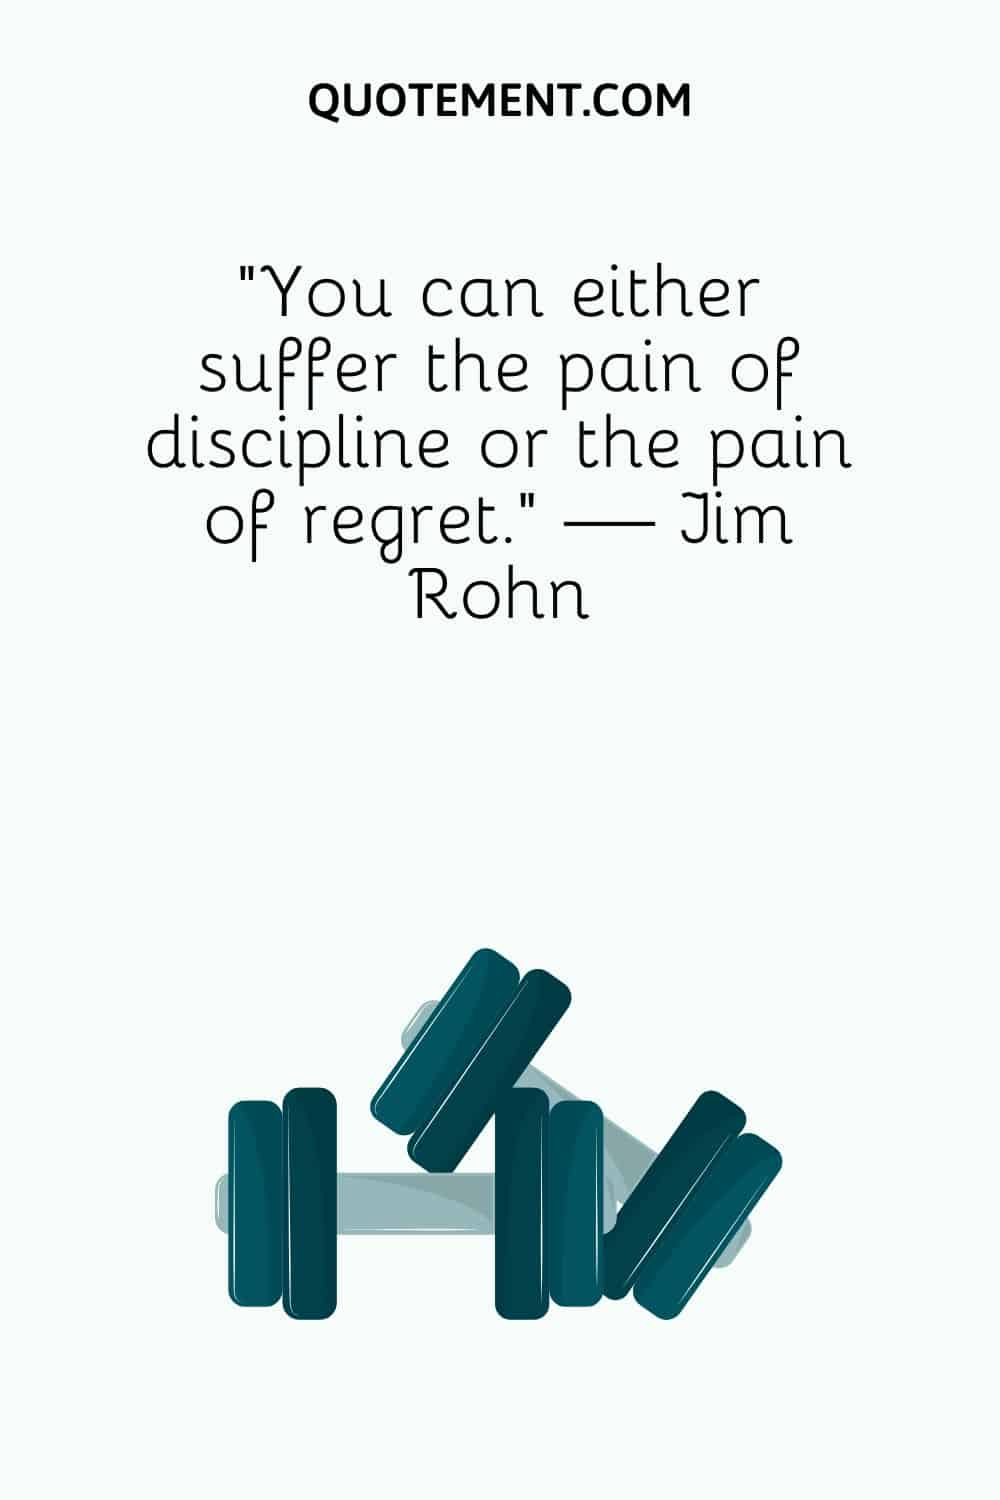 green dumbbells image representing short workout quote